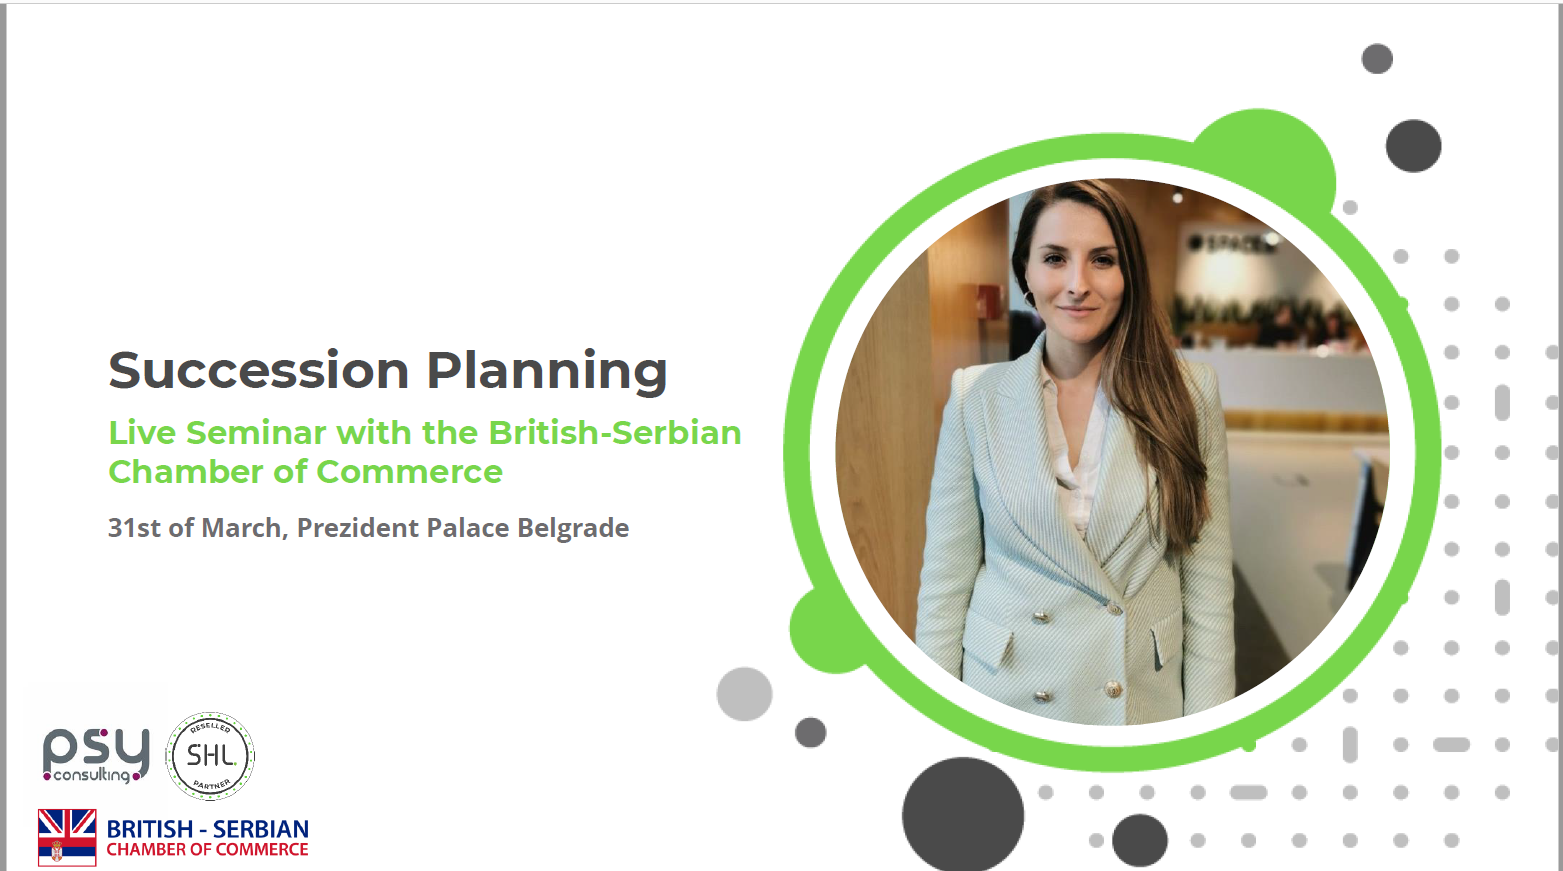 Announcing the speaker for the Succession Planning HR Seminar with our member PsyConsulting 31 March 2022